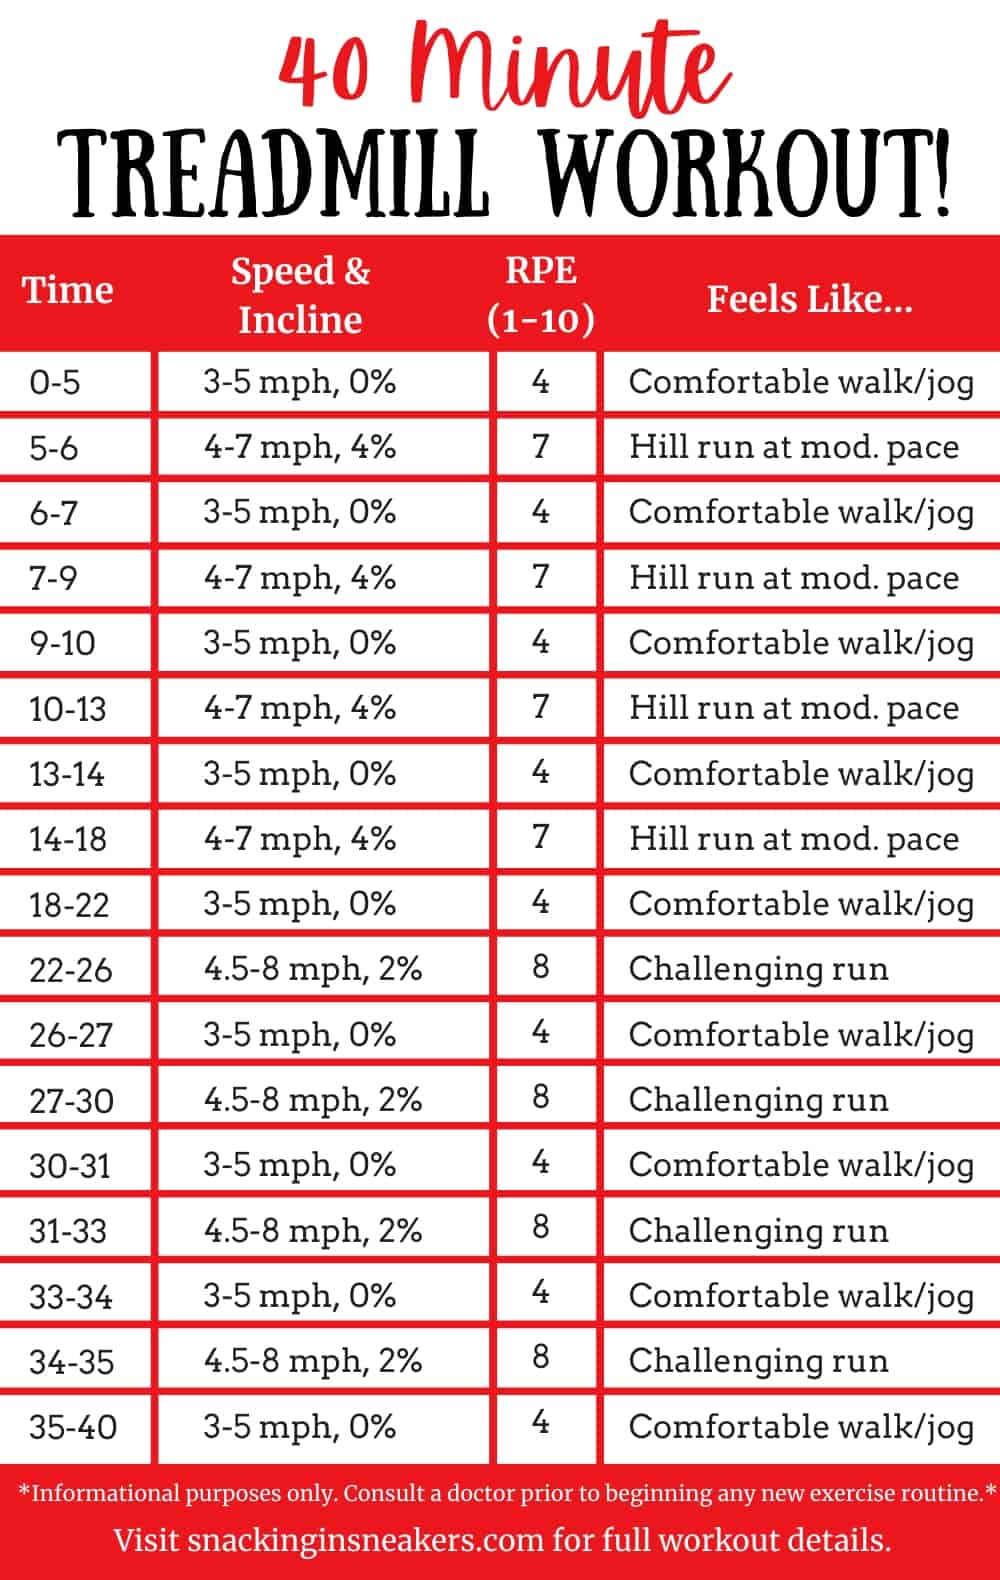 A 40 minute treadmill workout chart with speeds, inclines, and RPE.